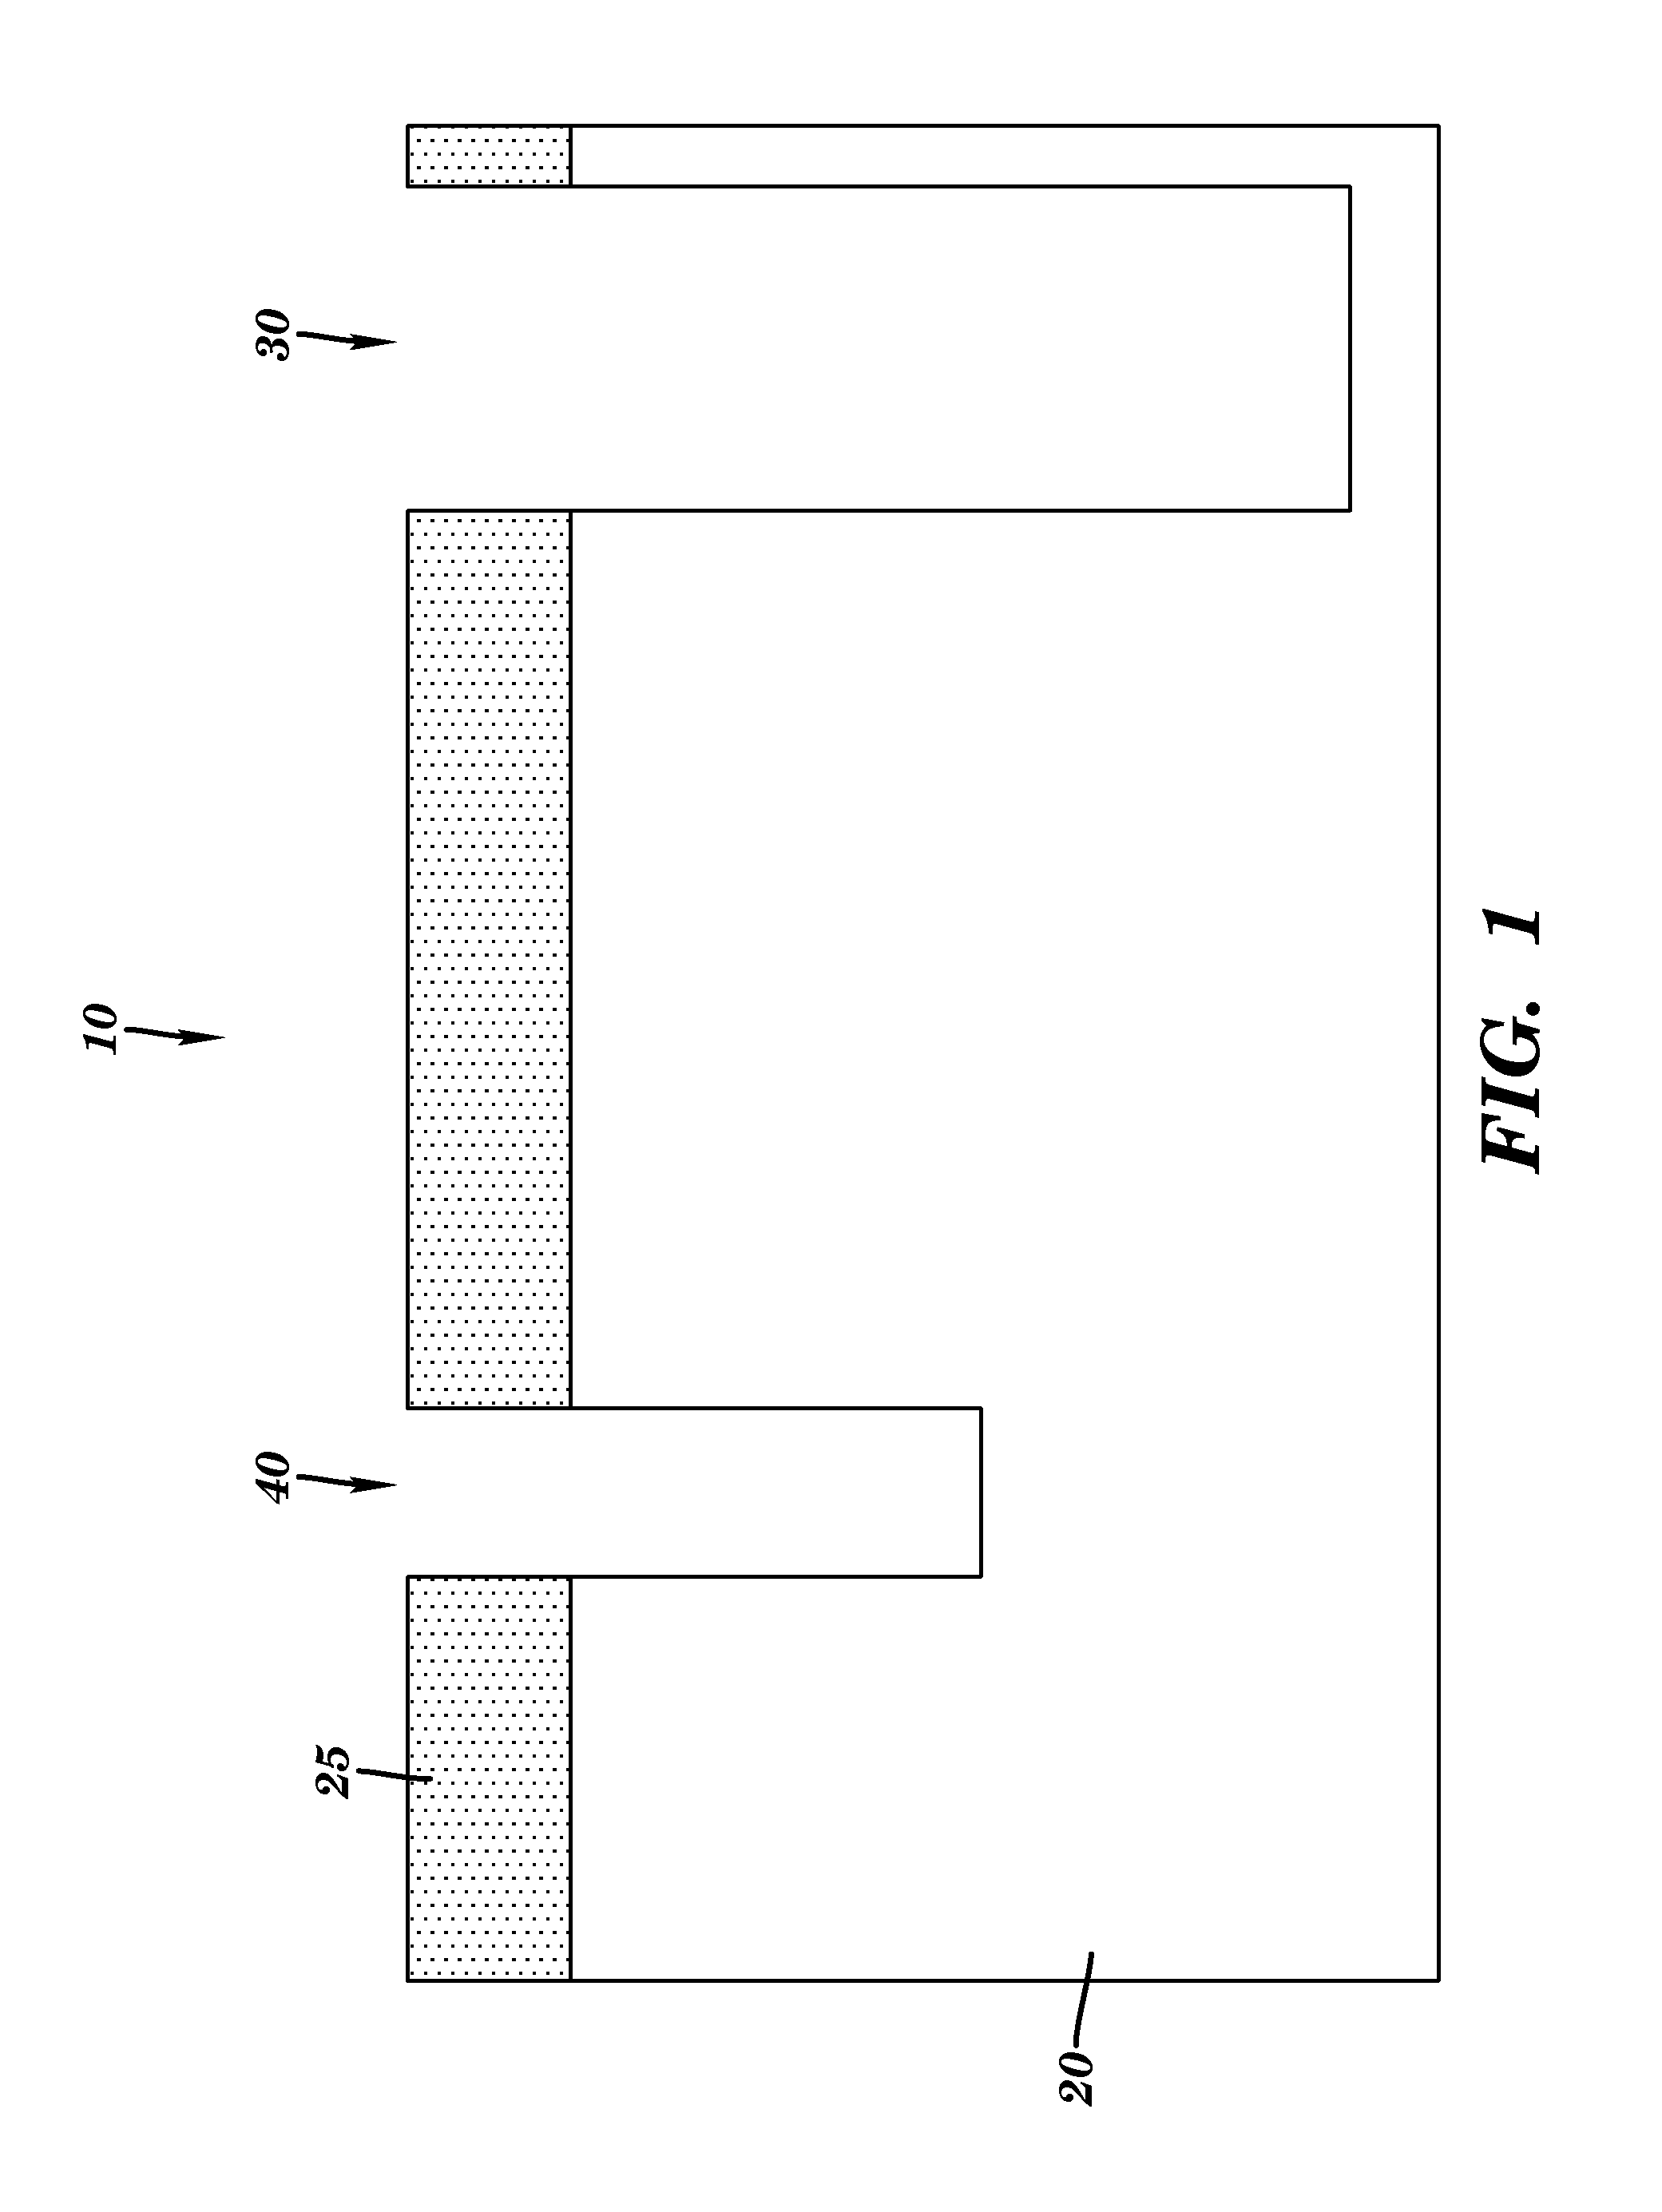 Structure and method for simultaneously forming a through silicon via and a deep trench structure